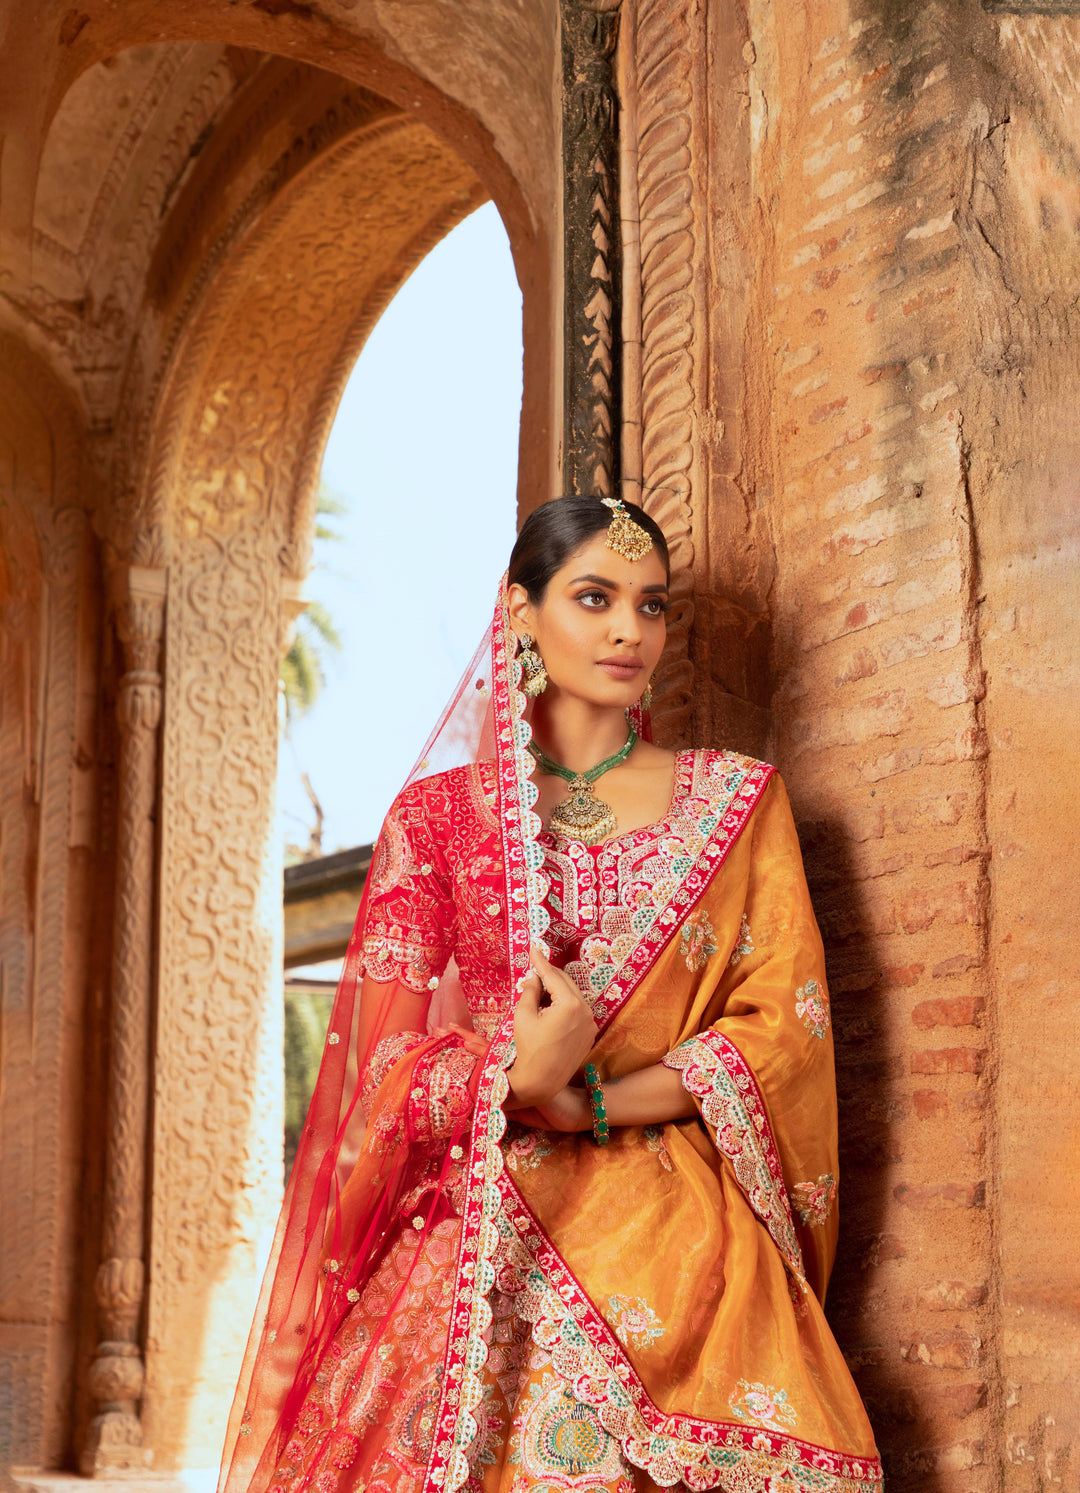 Regal Silk Lehenga with Multi-Color Thread Work and Sequins